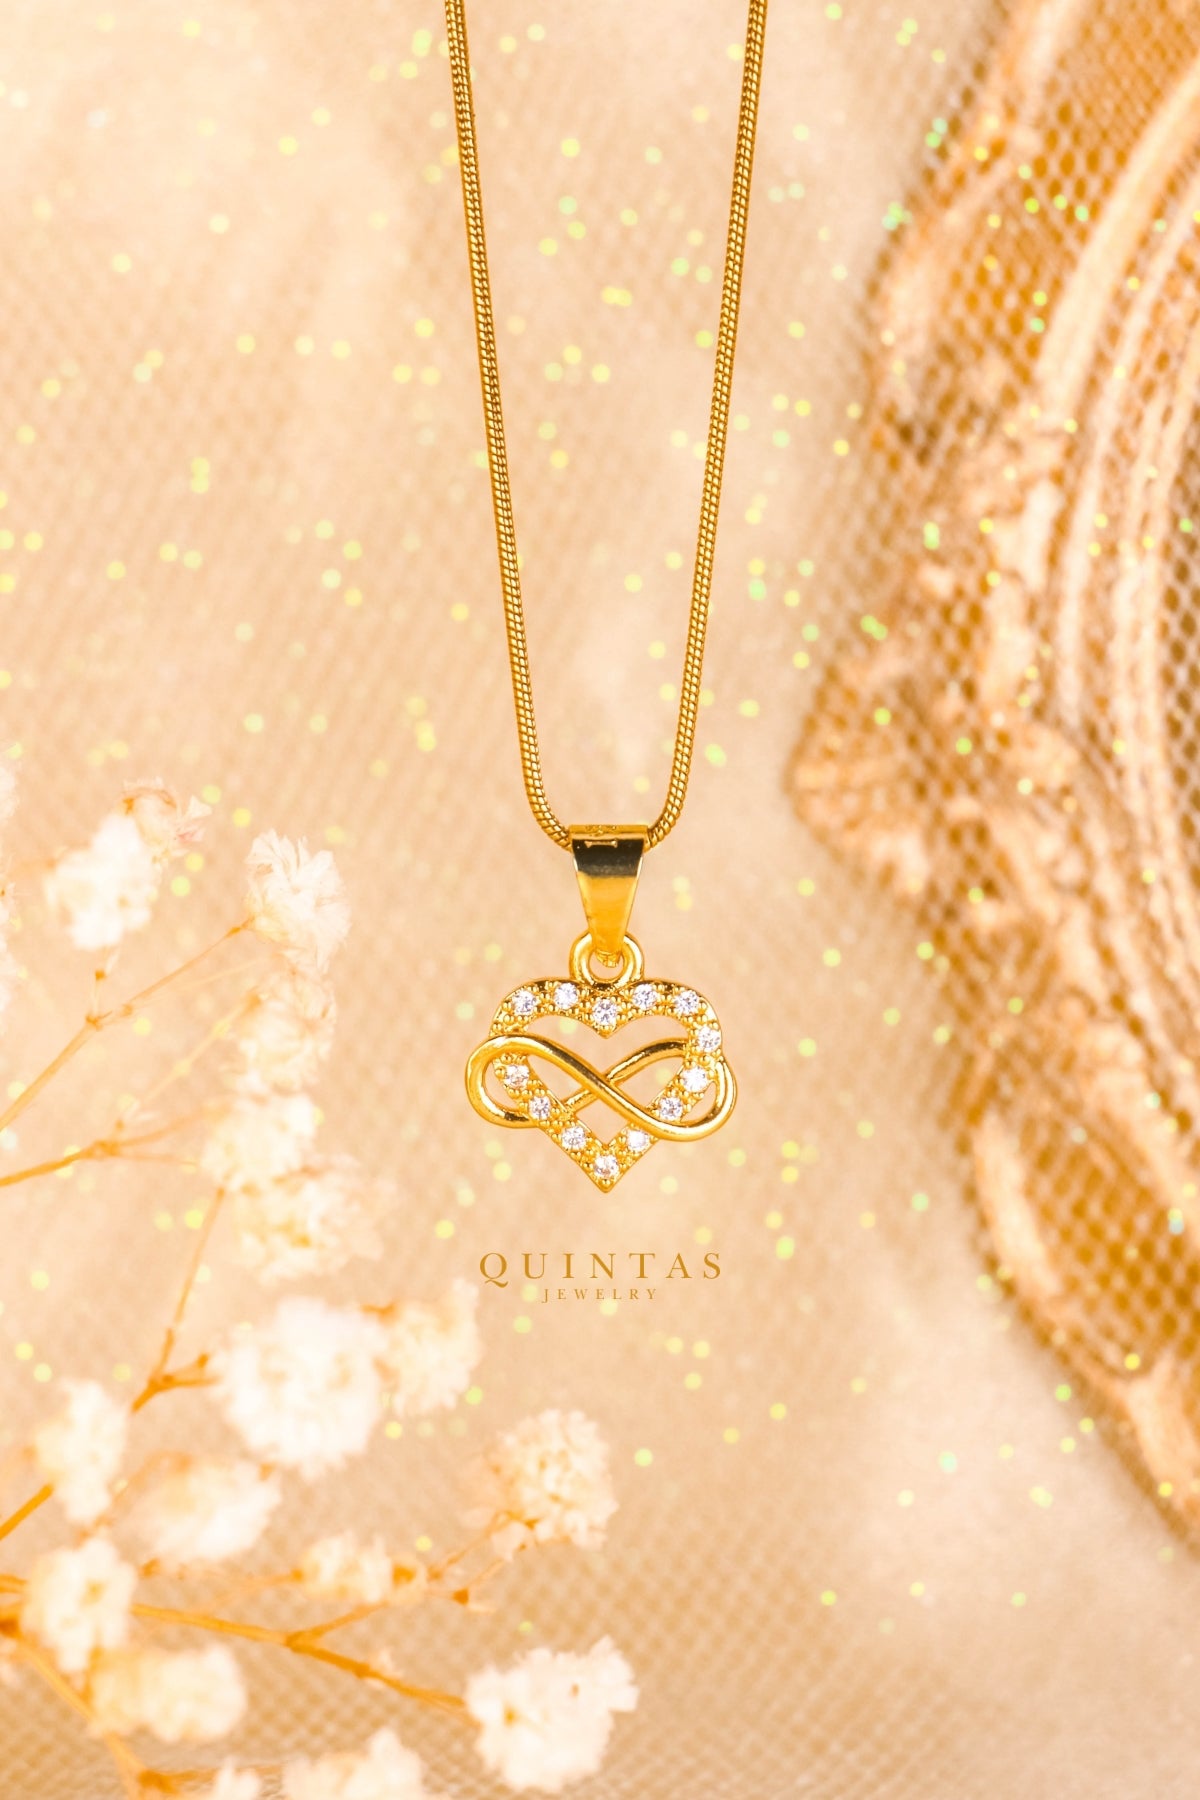 Love Infinity Necklace